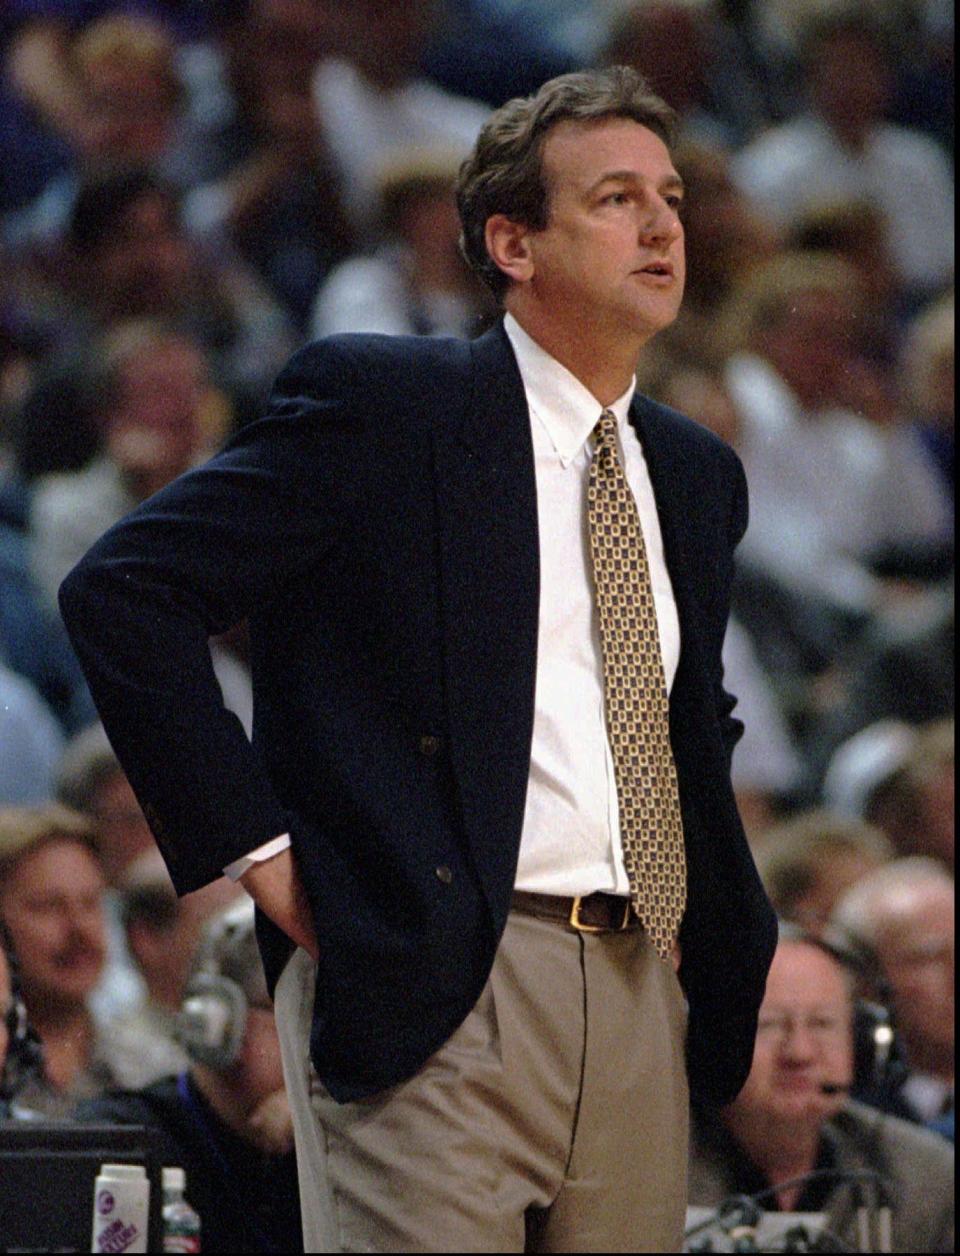 Phoenix Suns head coach Paul Westphal watches game action between the Suns and the Dallas Mavericks at the America West Arena in Phoenix Friday Jan. 12, 1996. The Suns have called a news conference Tuesday afternoon Jan. 16, 1996, amid speculation that Westphal will be fired.